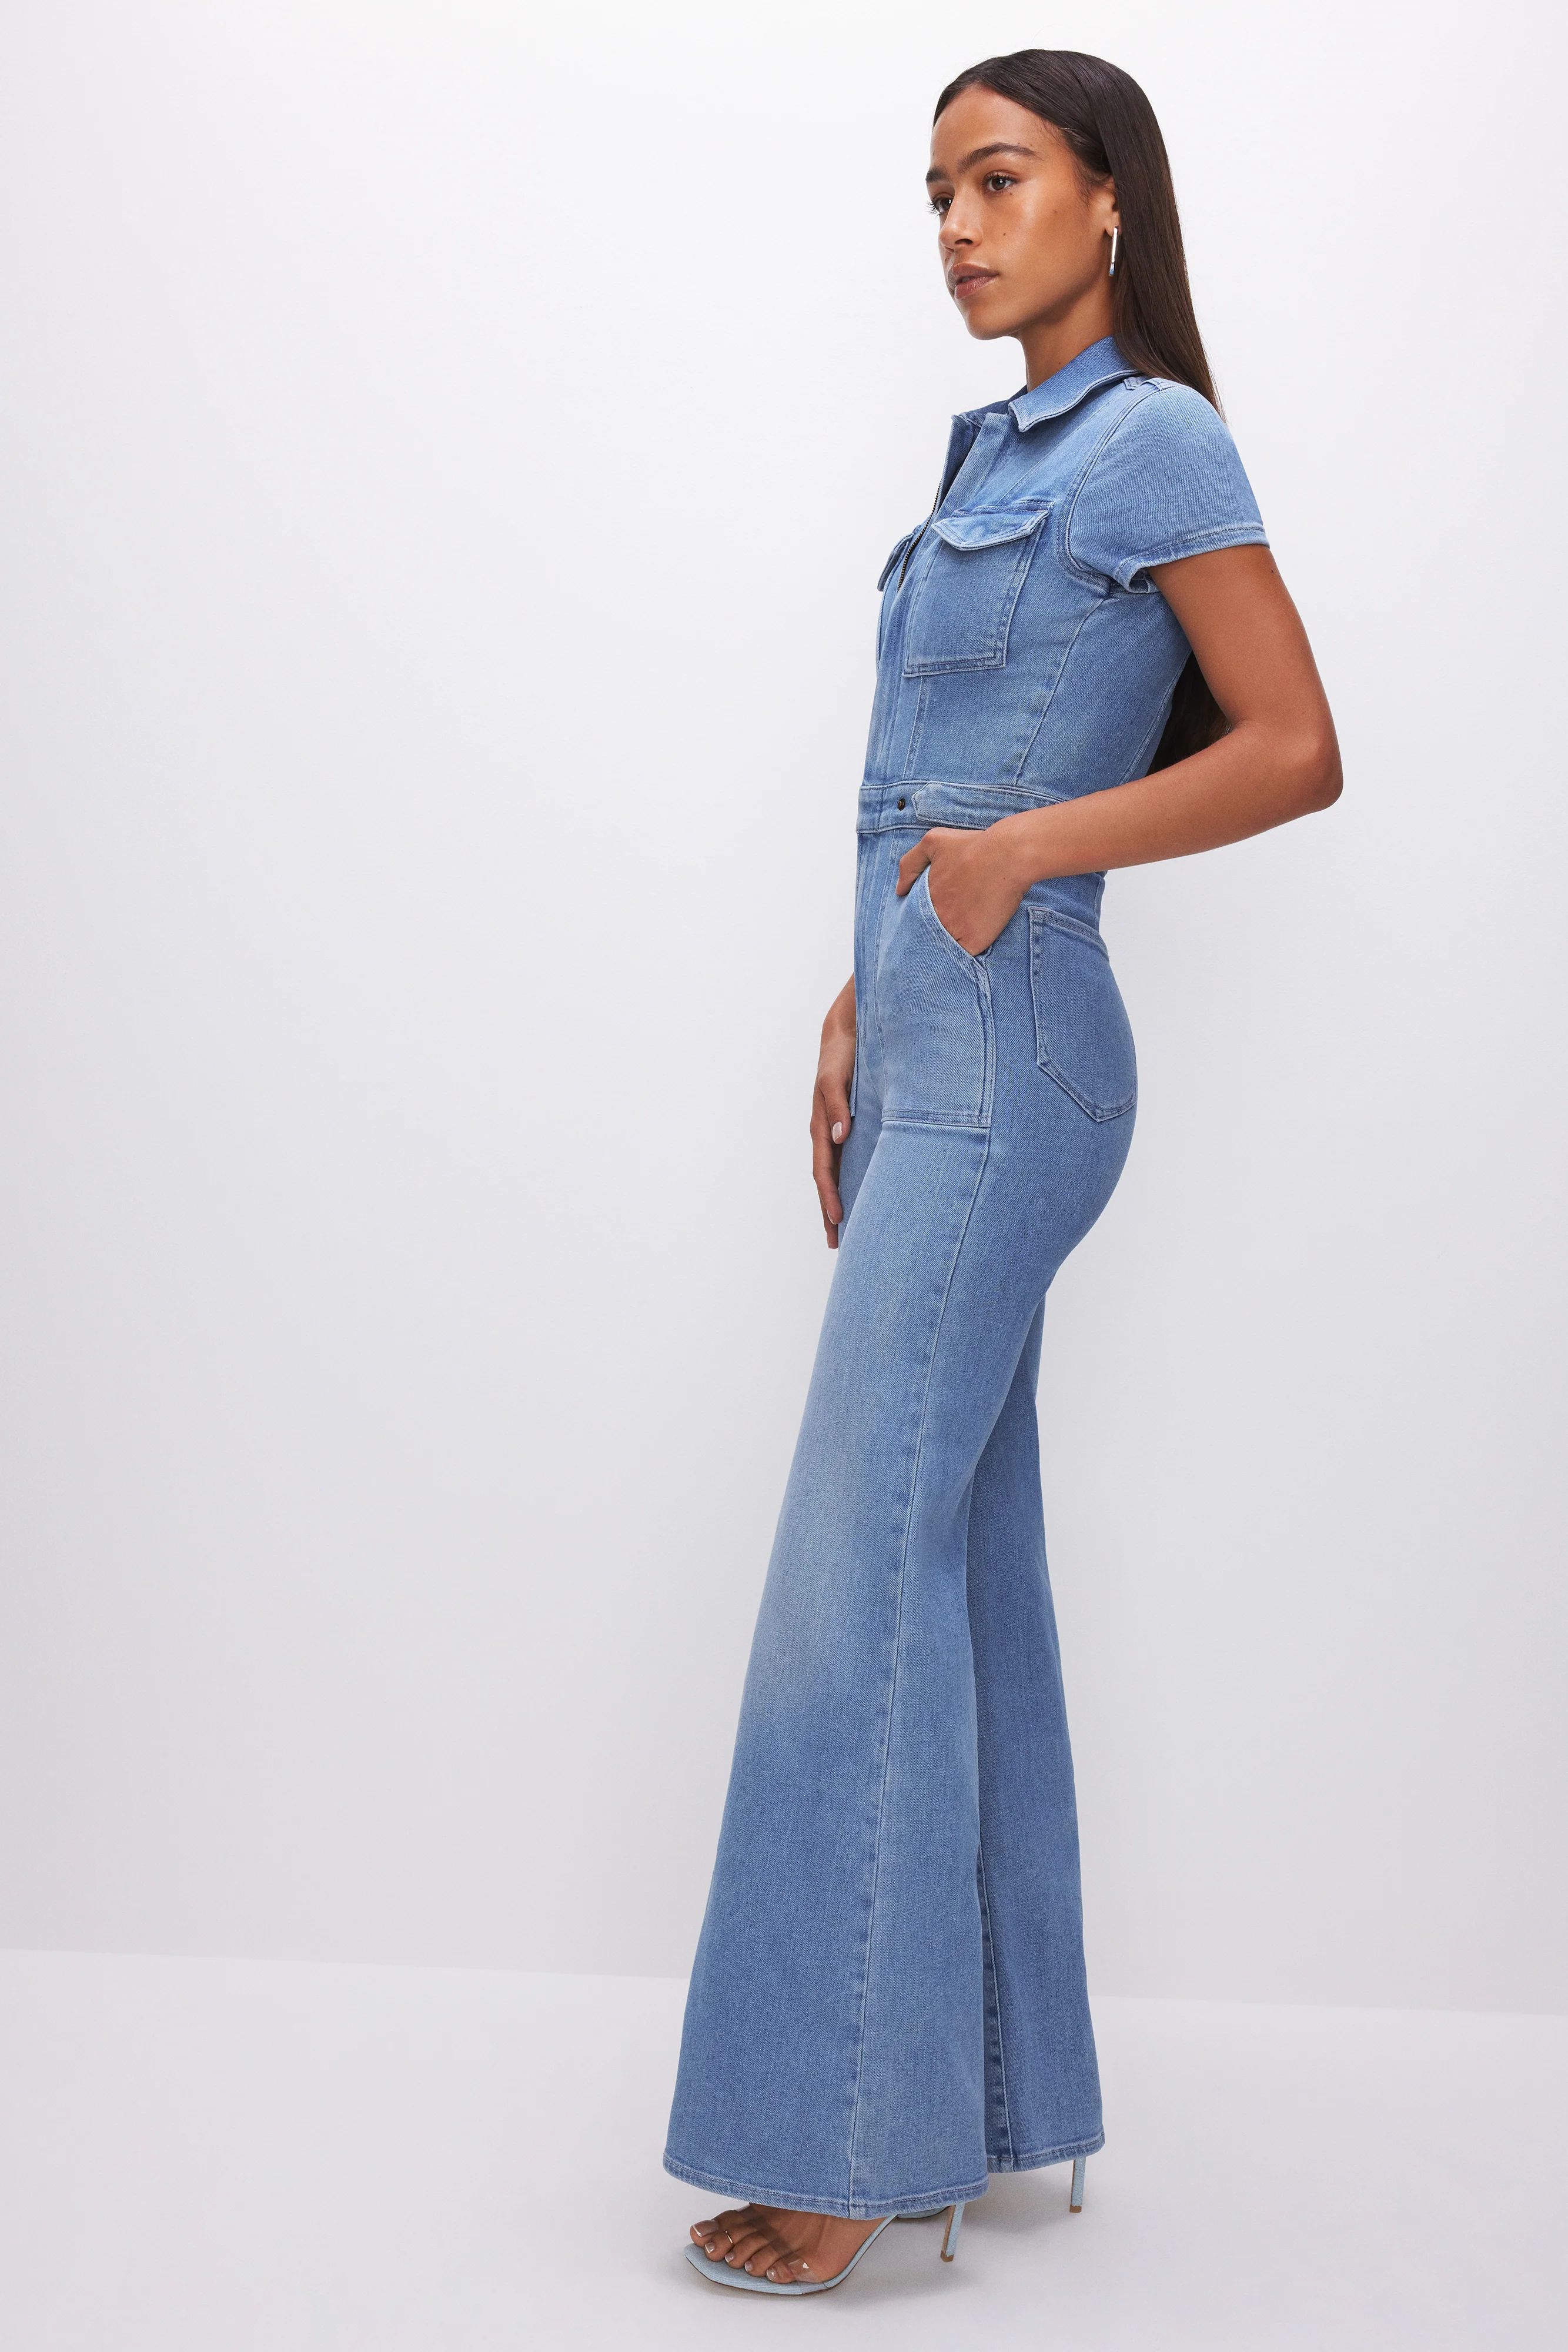 FIT FOR SUCCESS PALAZZO JUMPSUIT | Good American